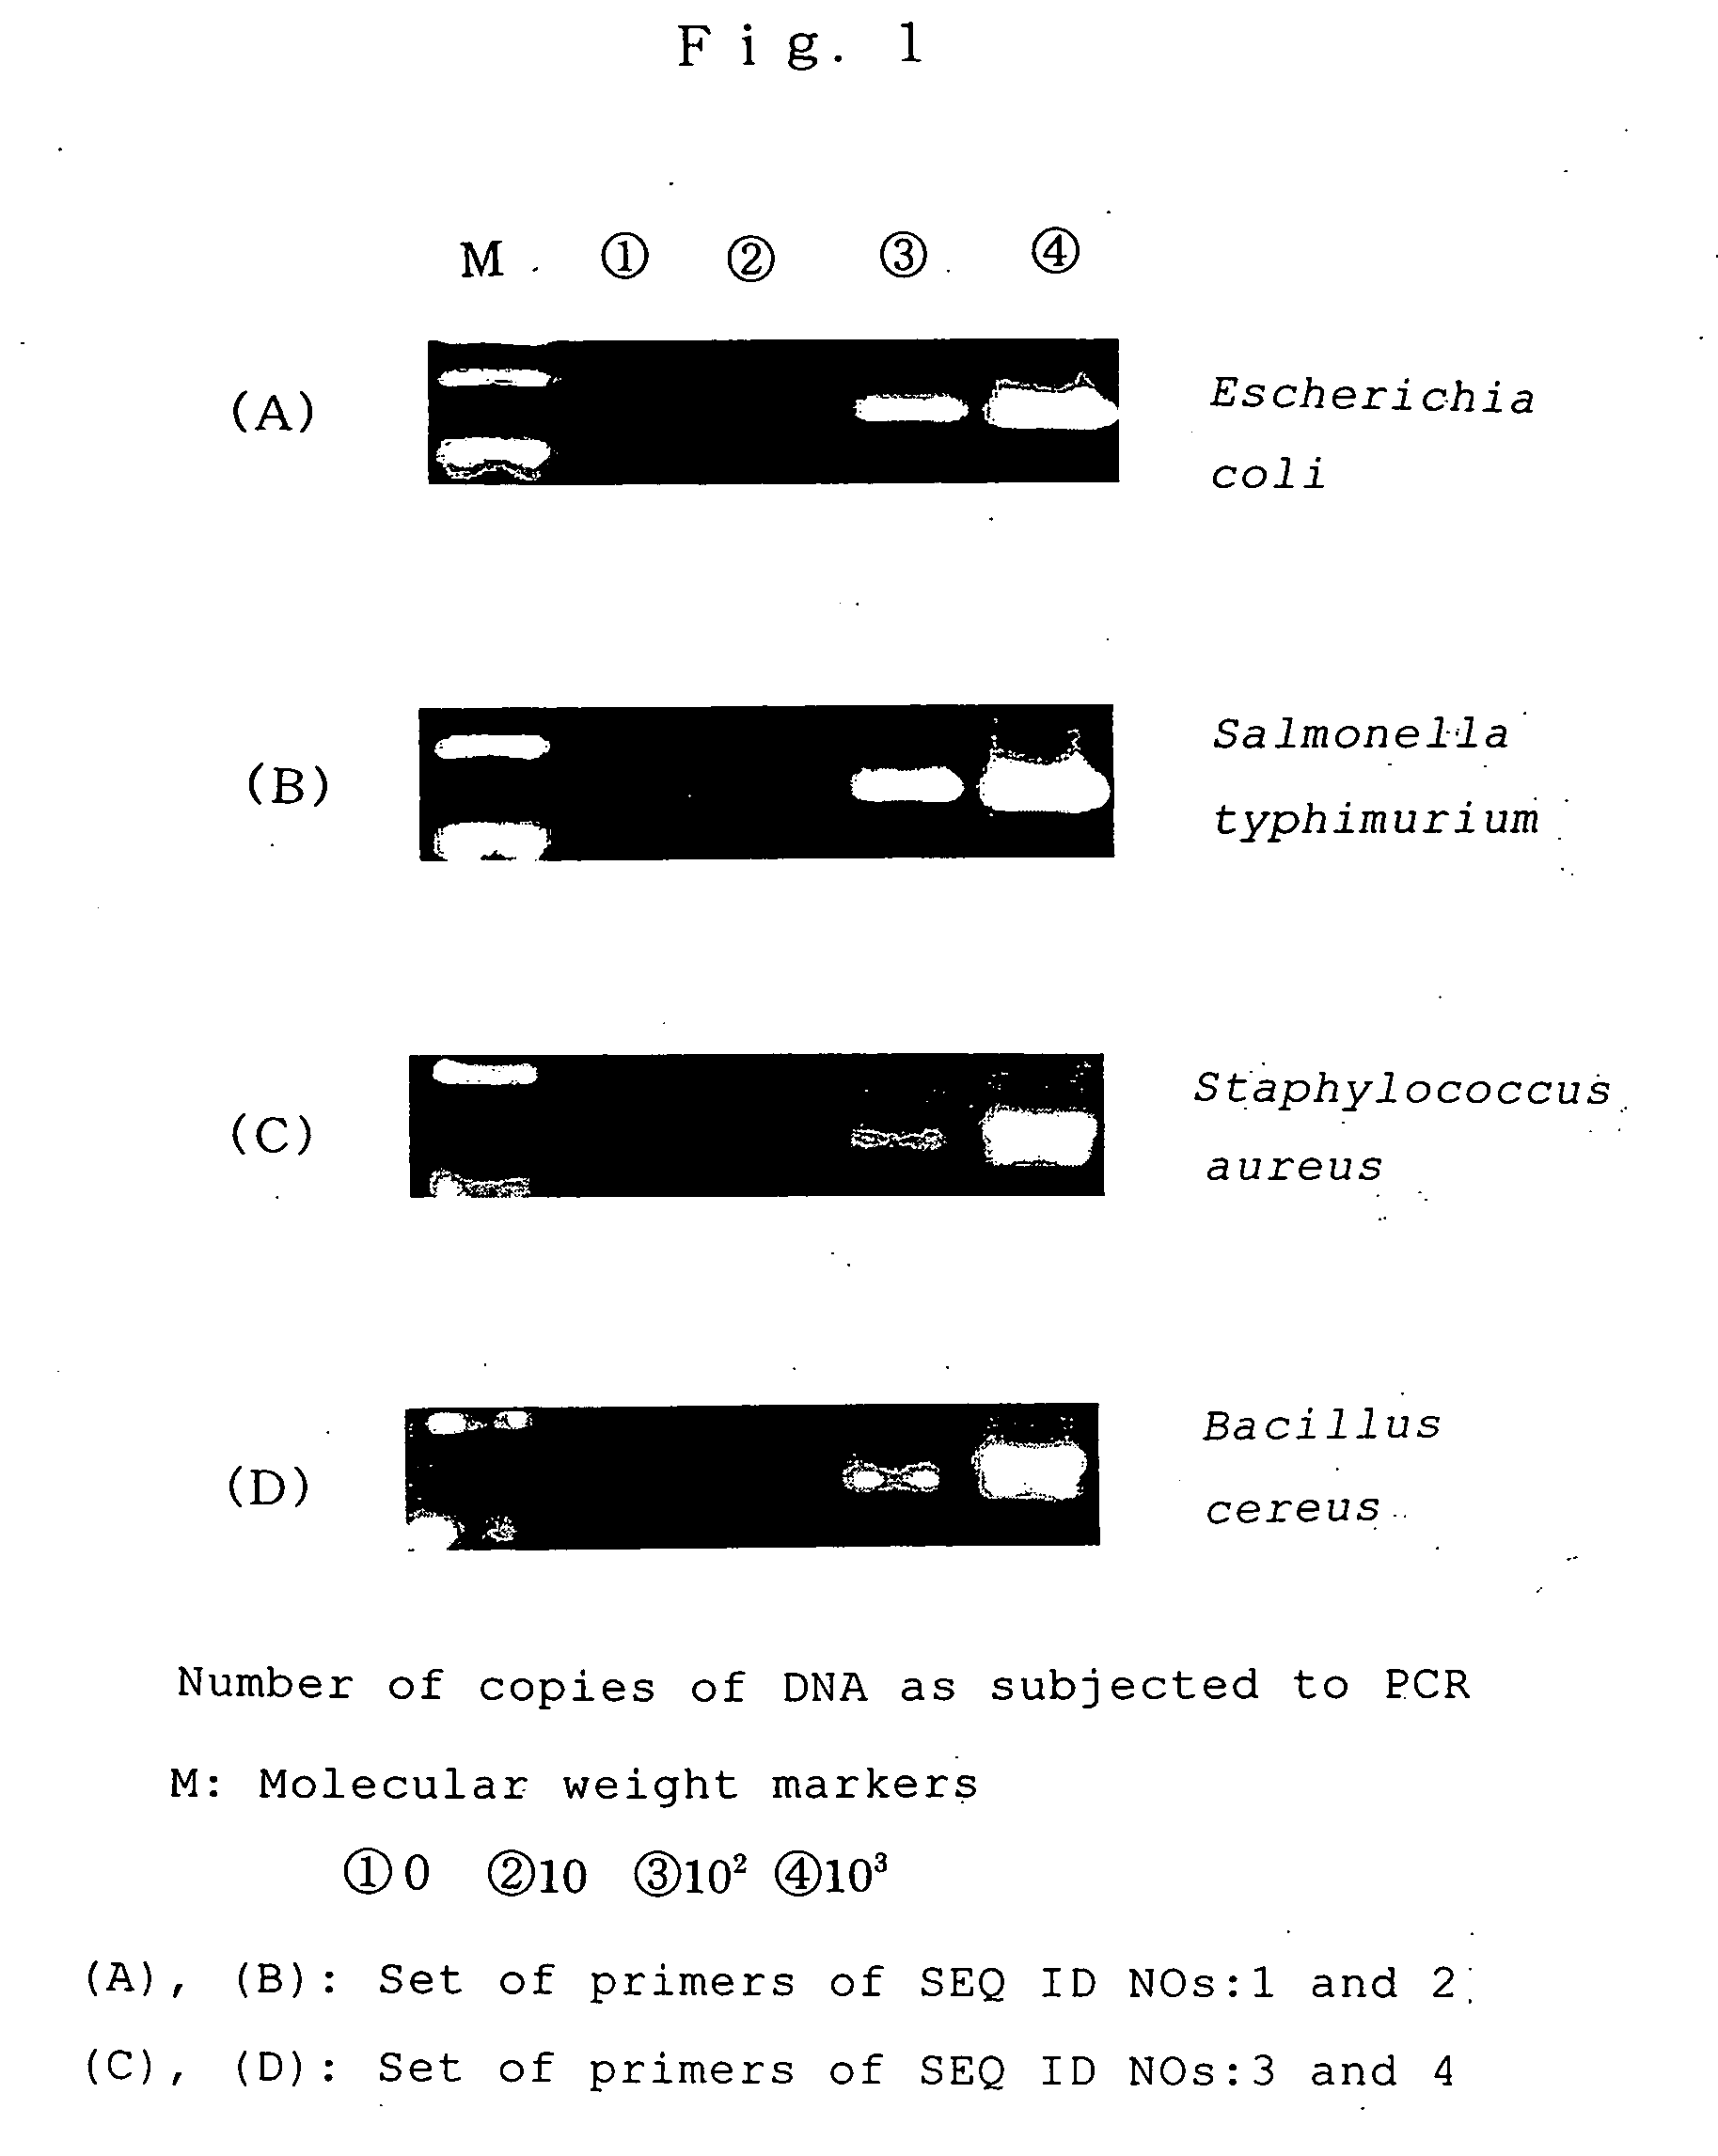 Primers and method of detecting bacteria